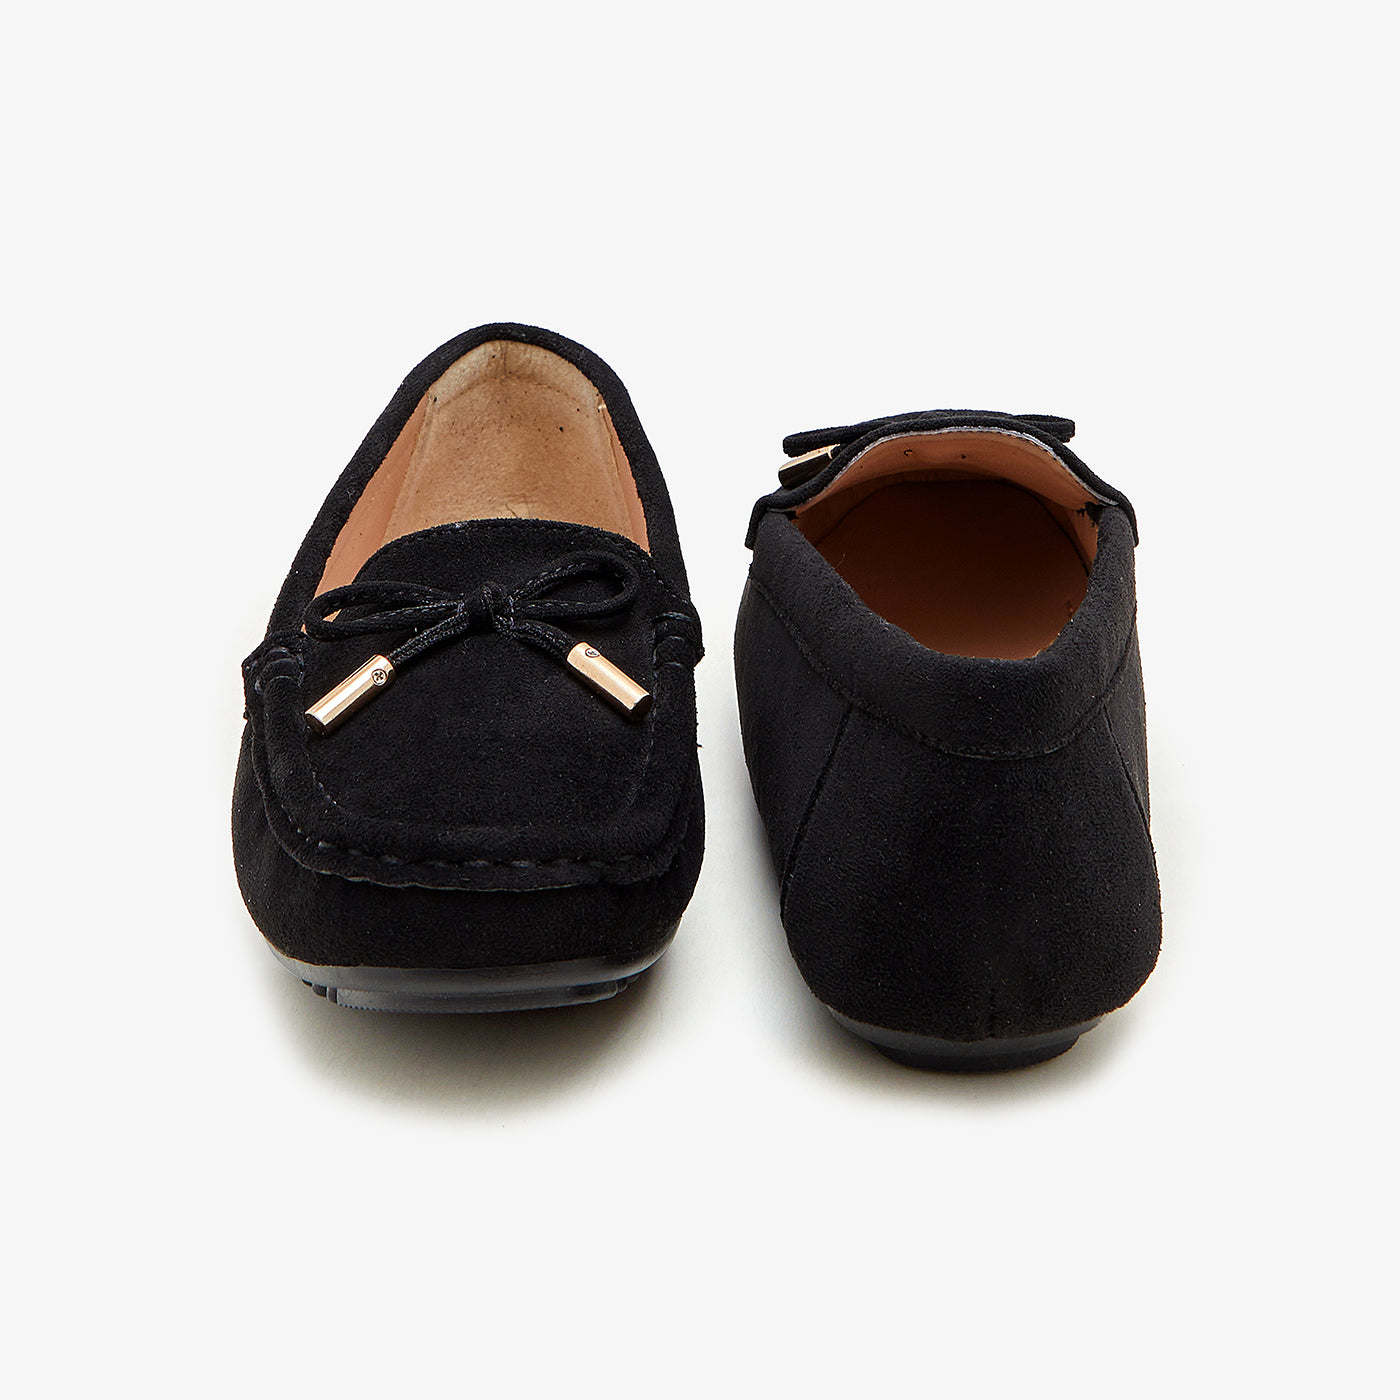 Women's Moccs with Bow Detail